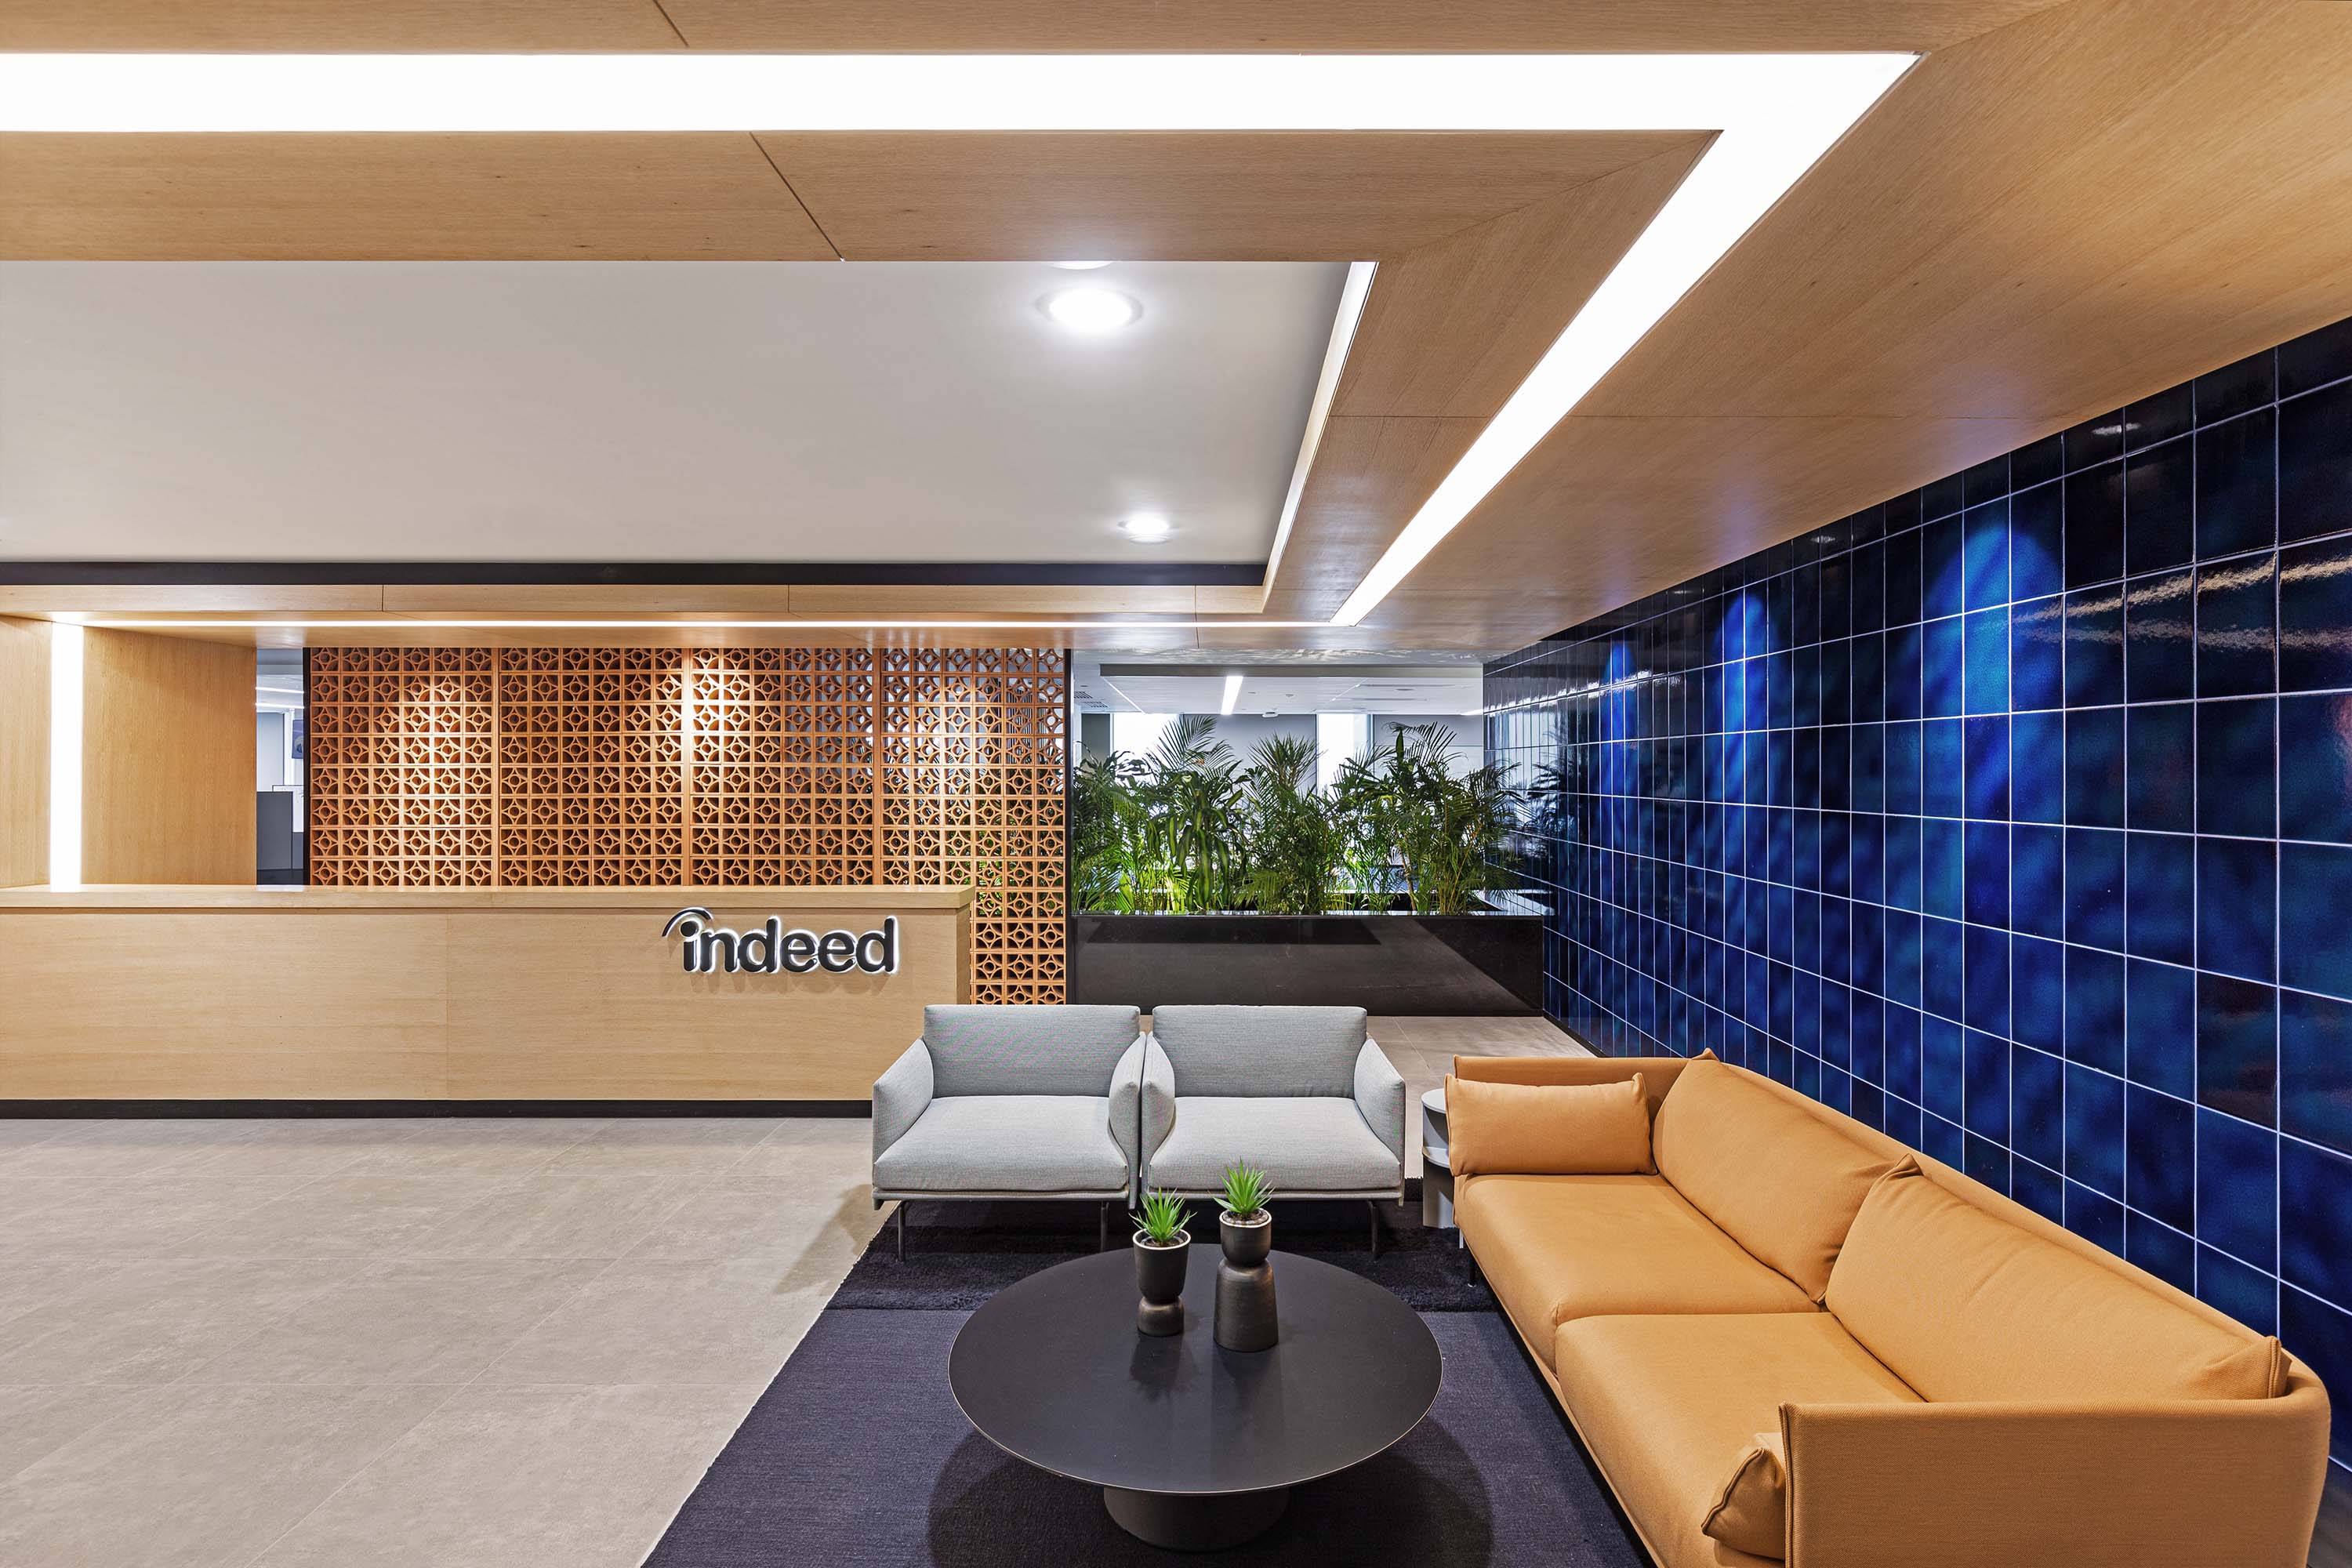 Reception waiting area of Indeed.com by Specht Novak Architects featuring blue tiled wall and wood accents.